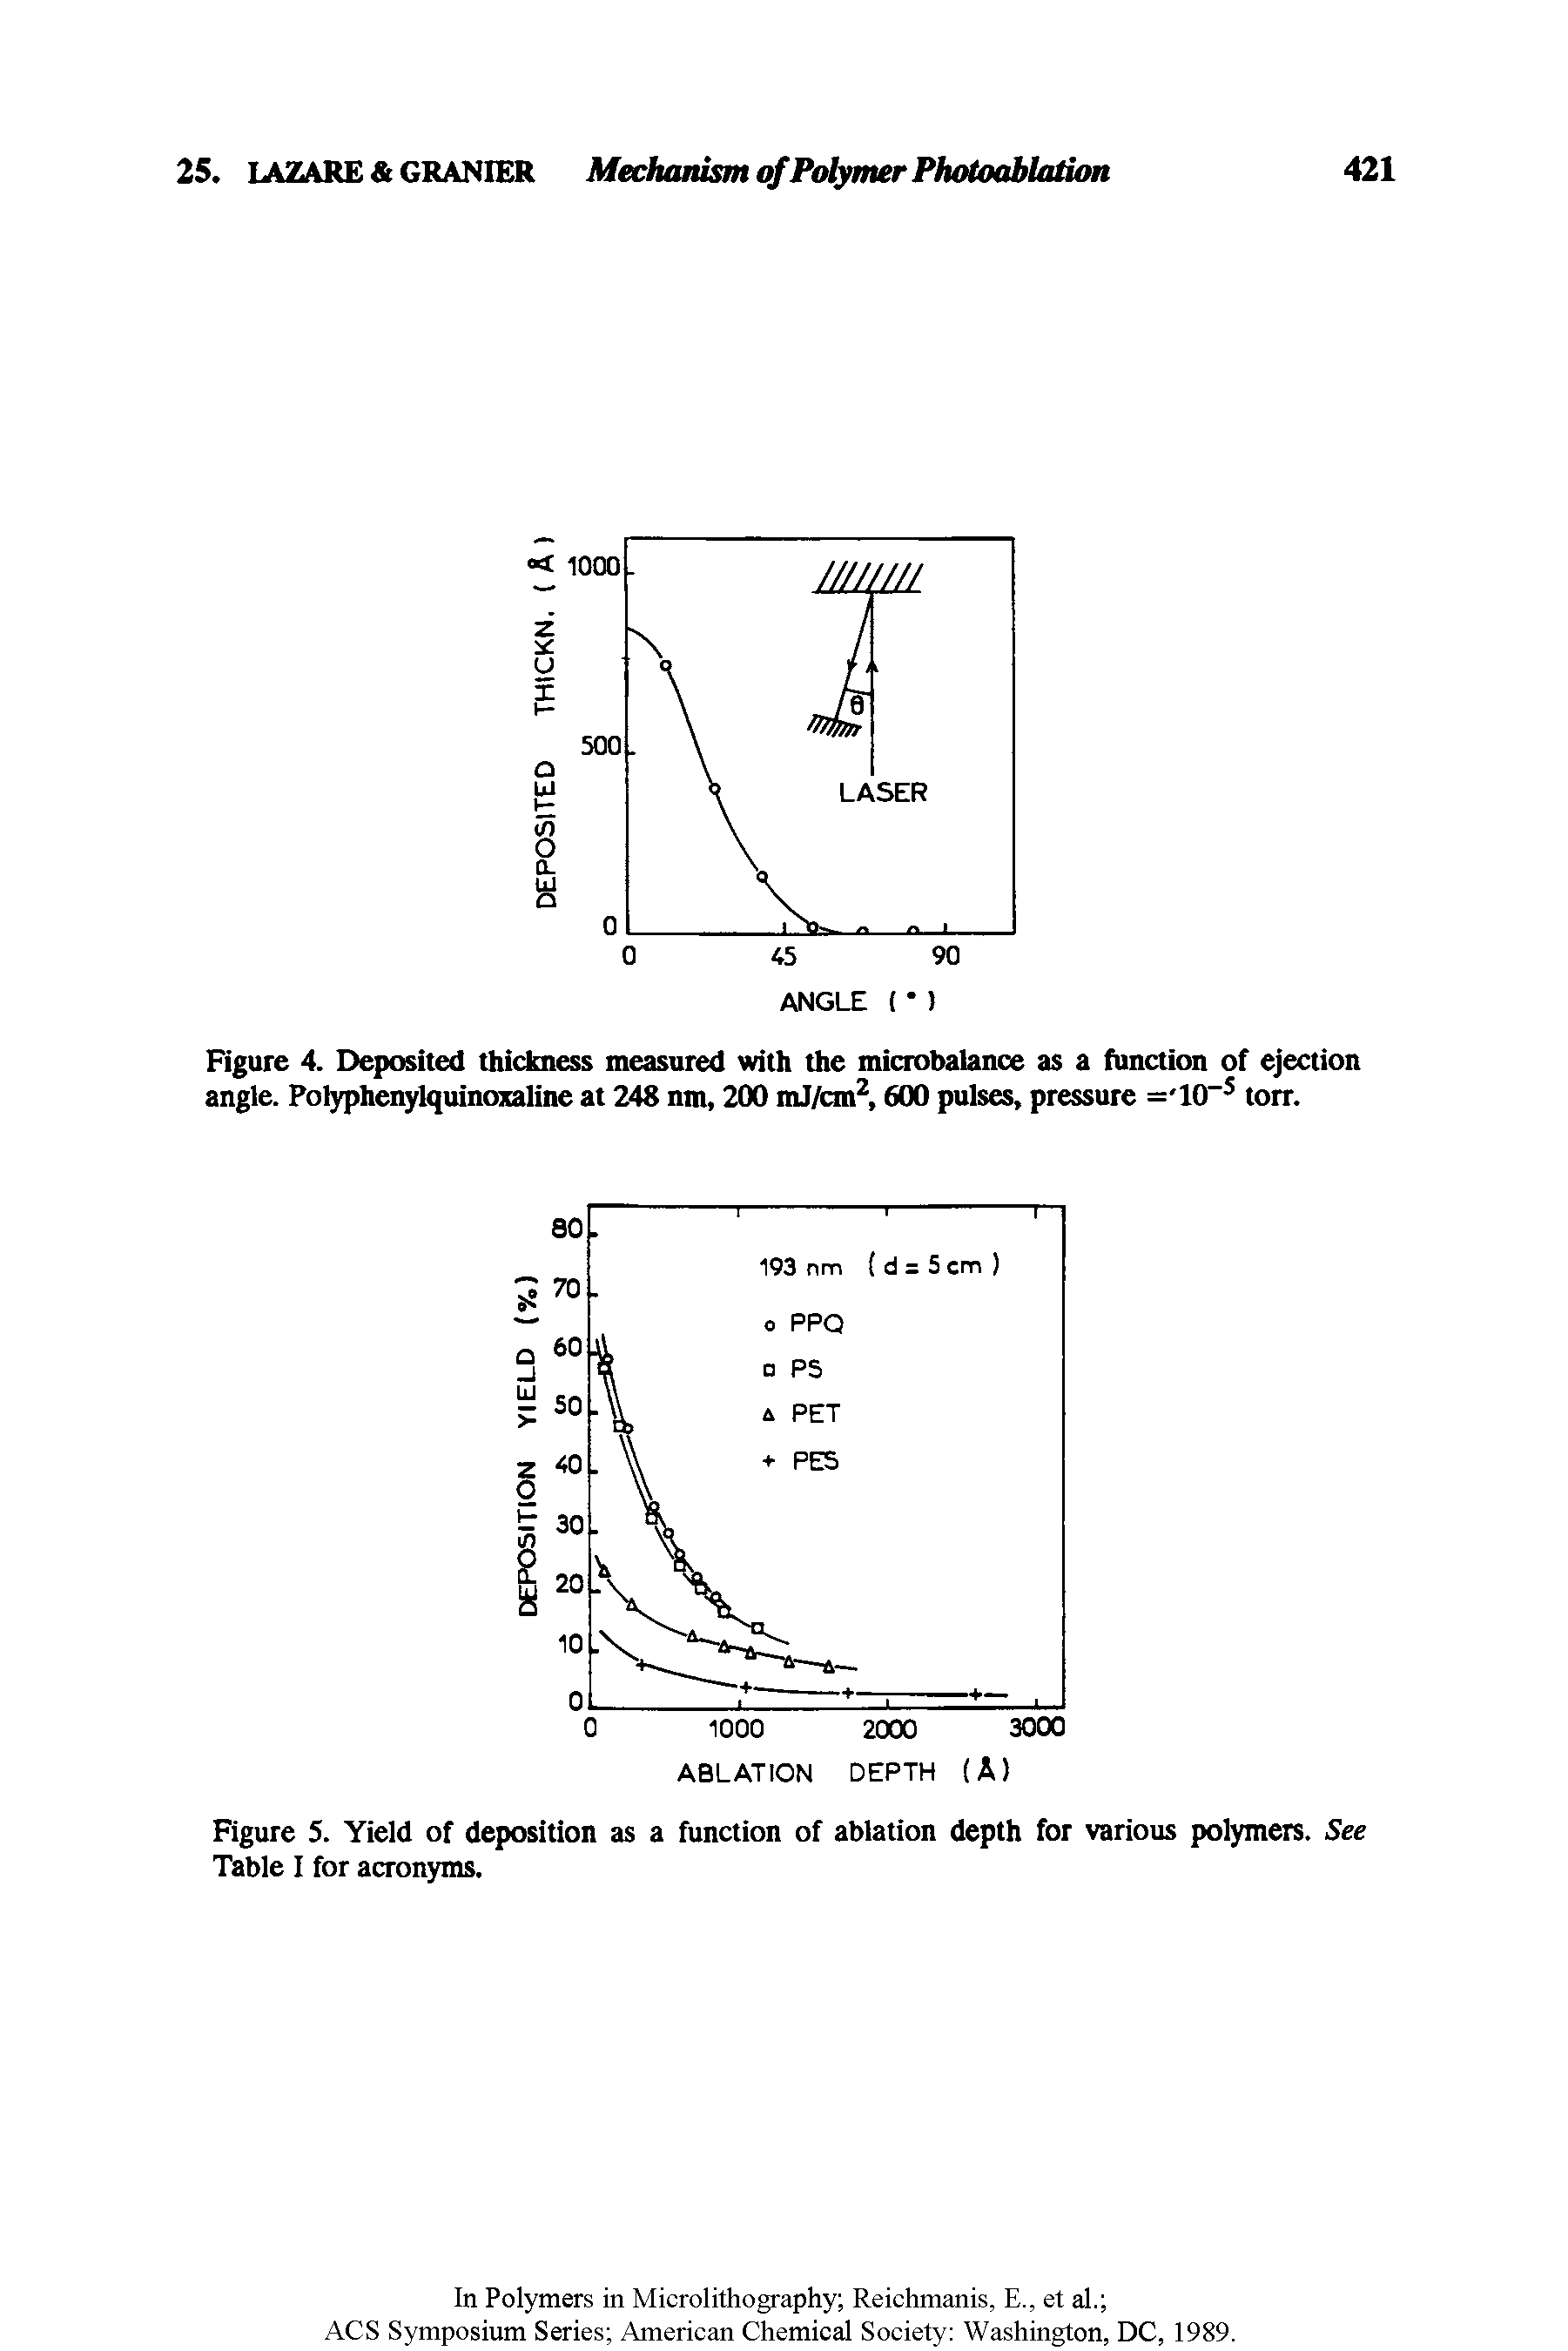 Figure 5. Yield of deposition as a function of ablation depth for various polymers. See Table I for acronyms.